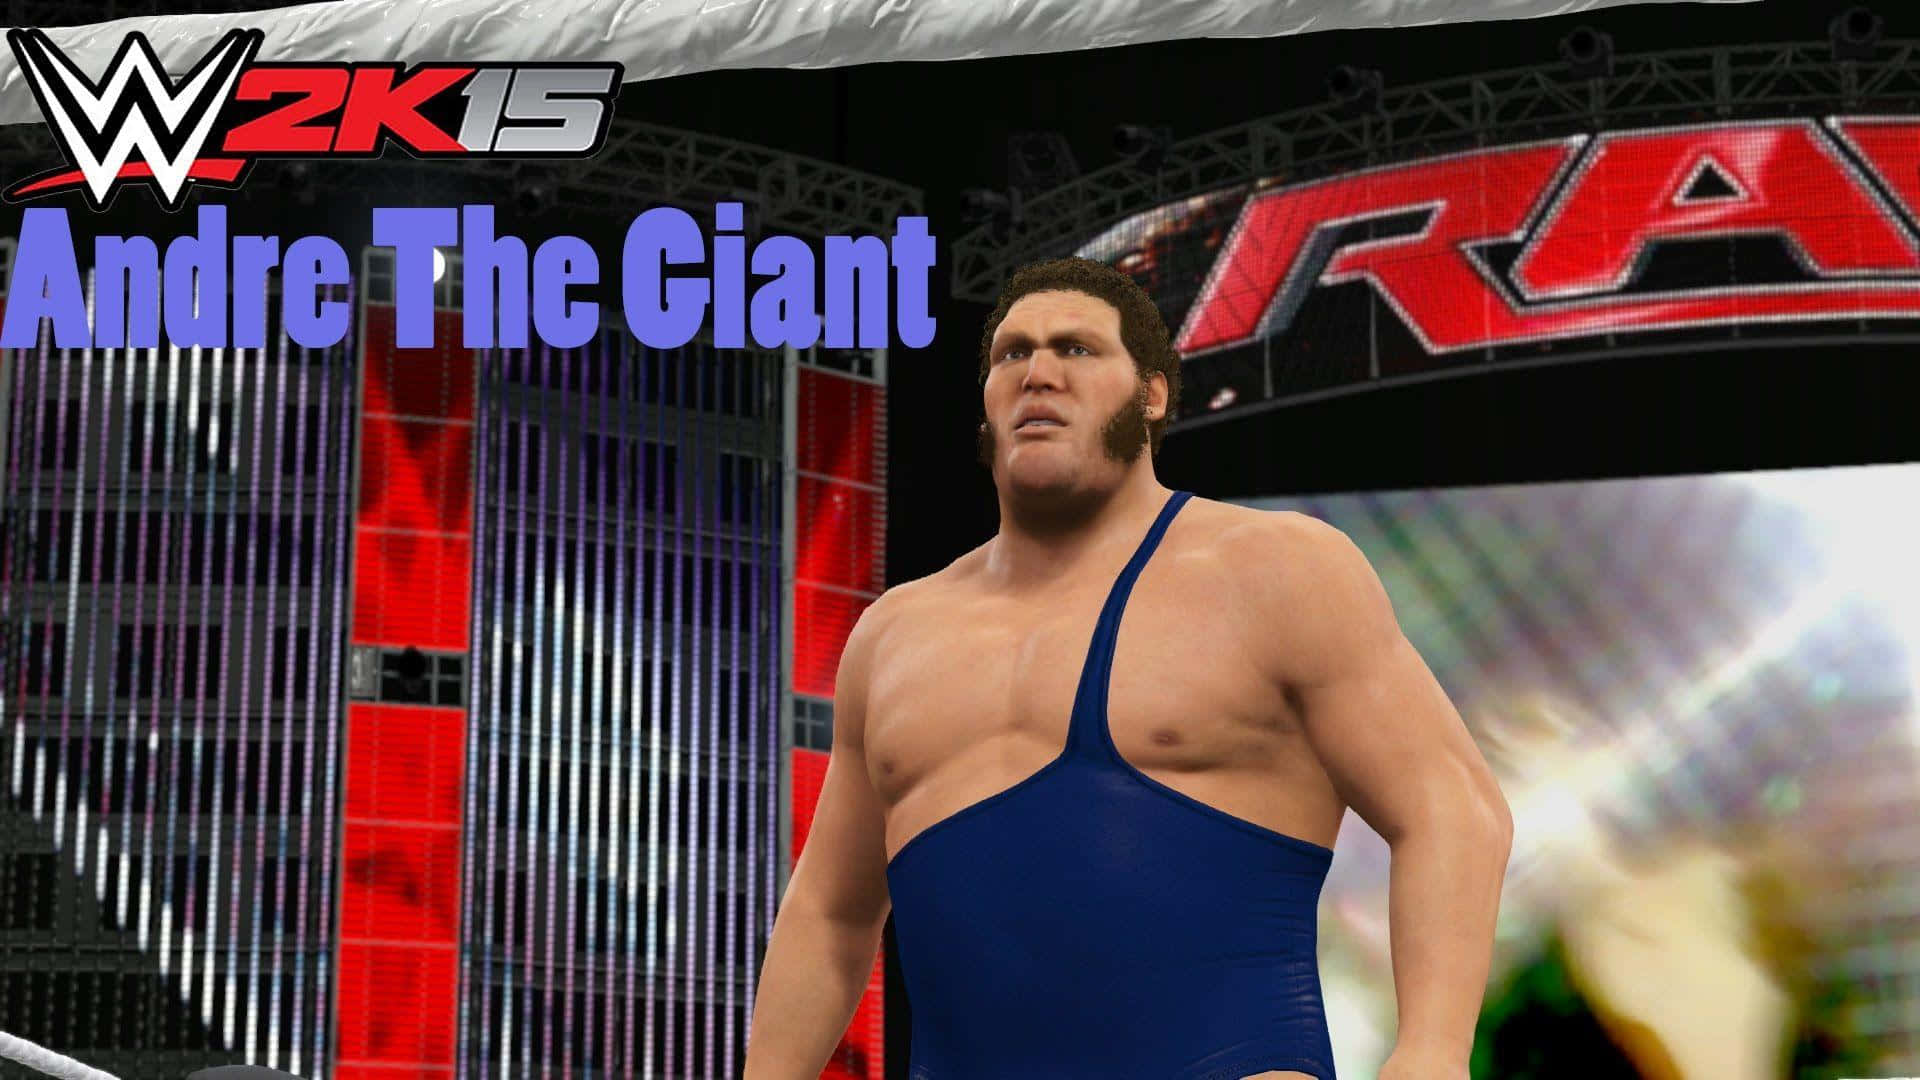 Andre The Giant WWE 2K15 Game Wallpaper